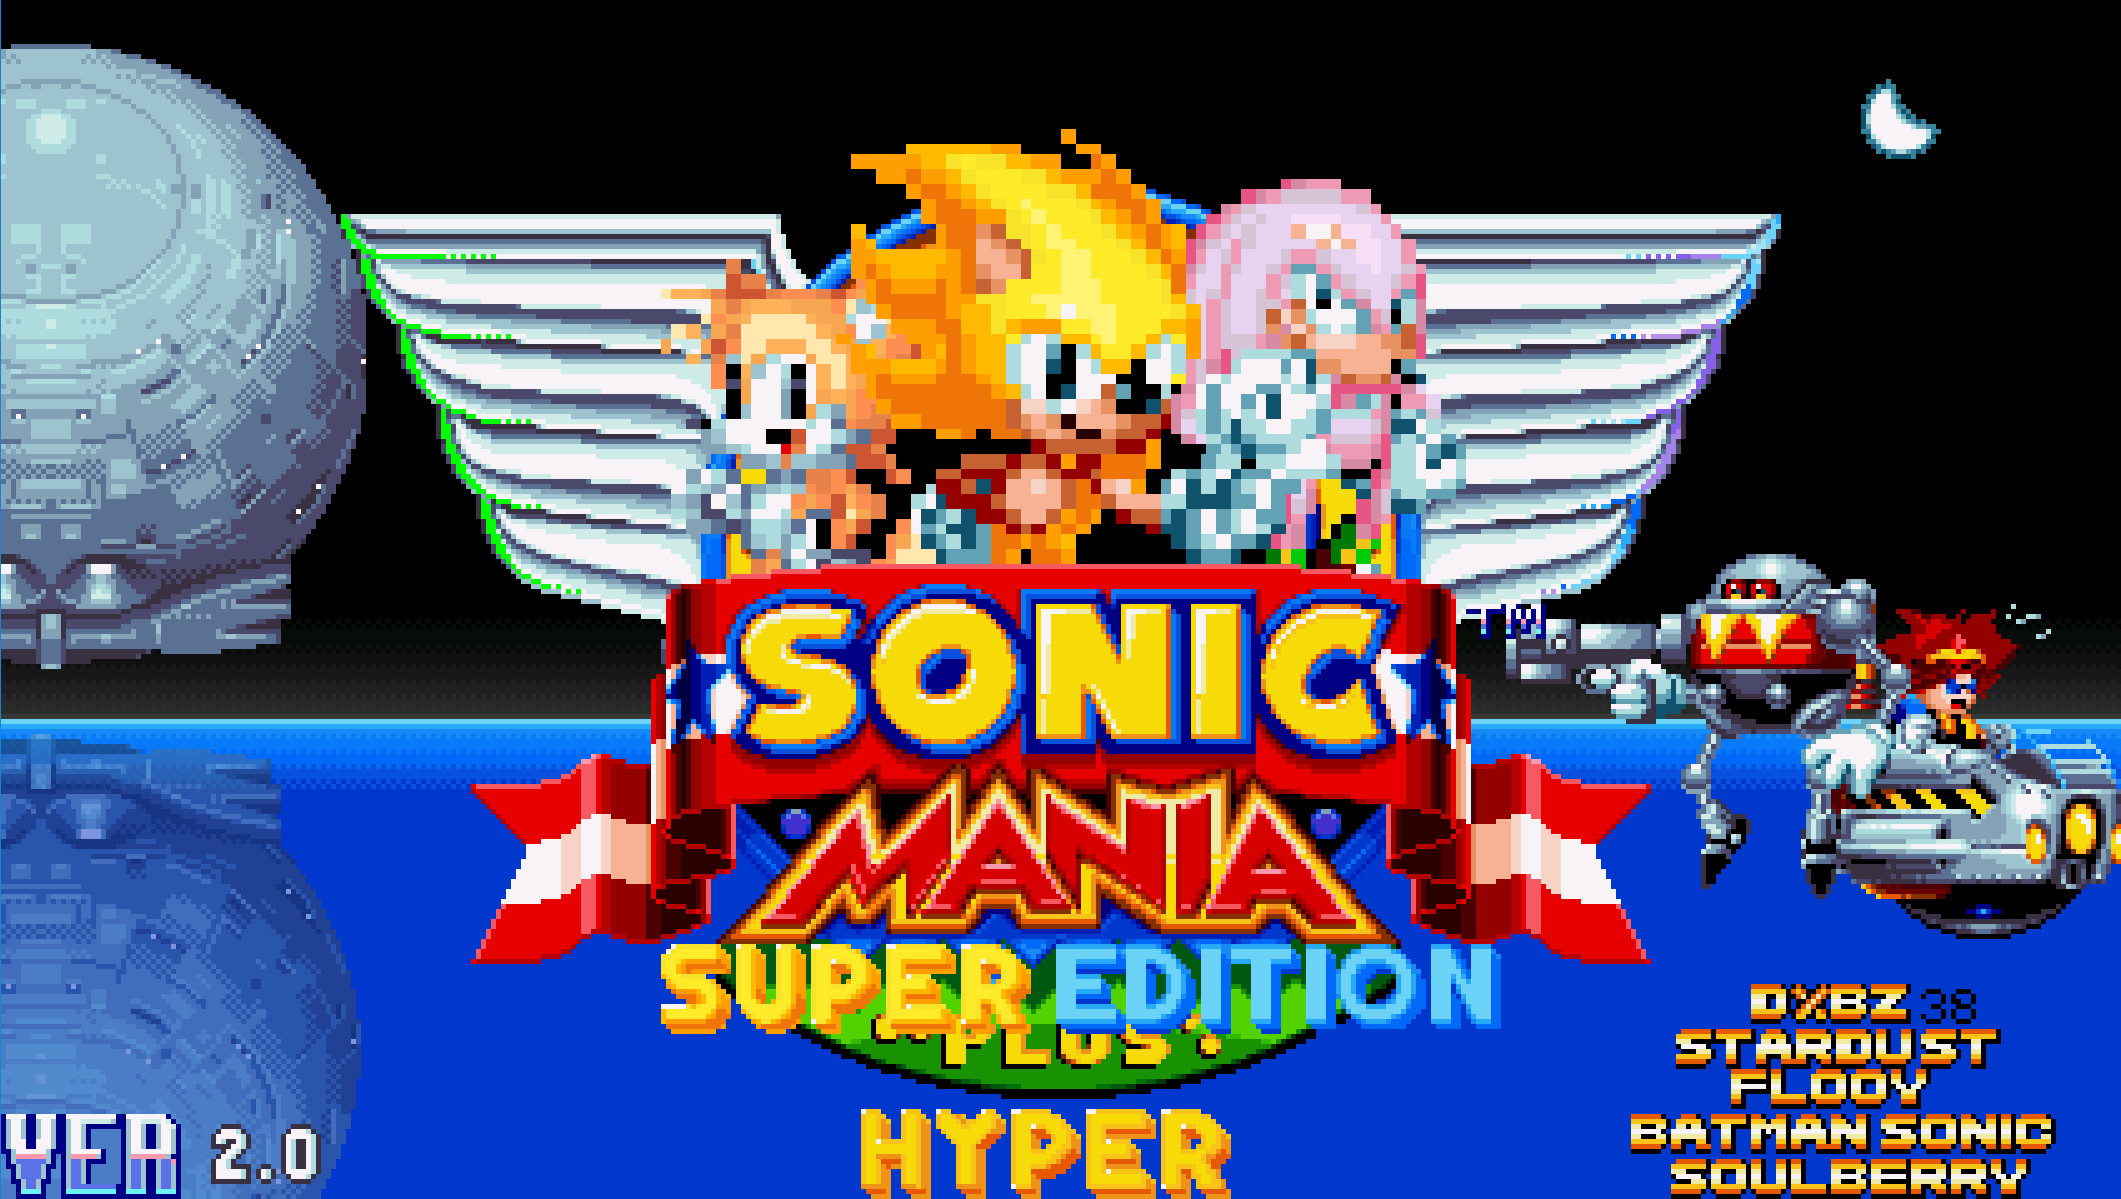 Sonic 3 Hyper Sonic : Free Download, Borrow, and Streaming